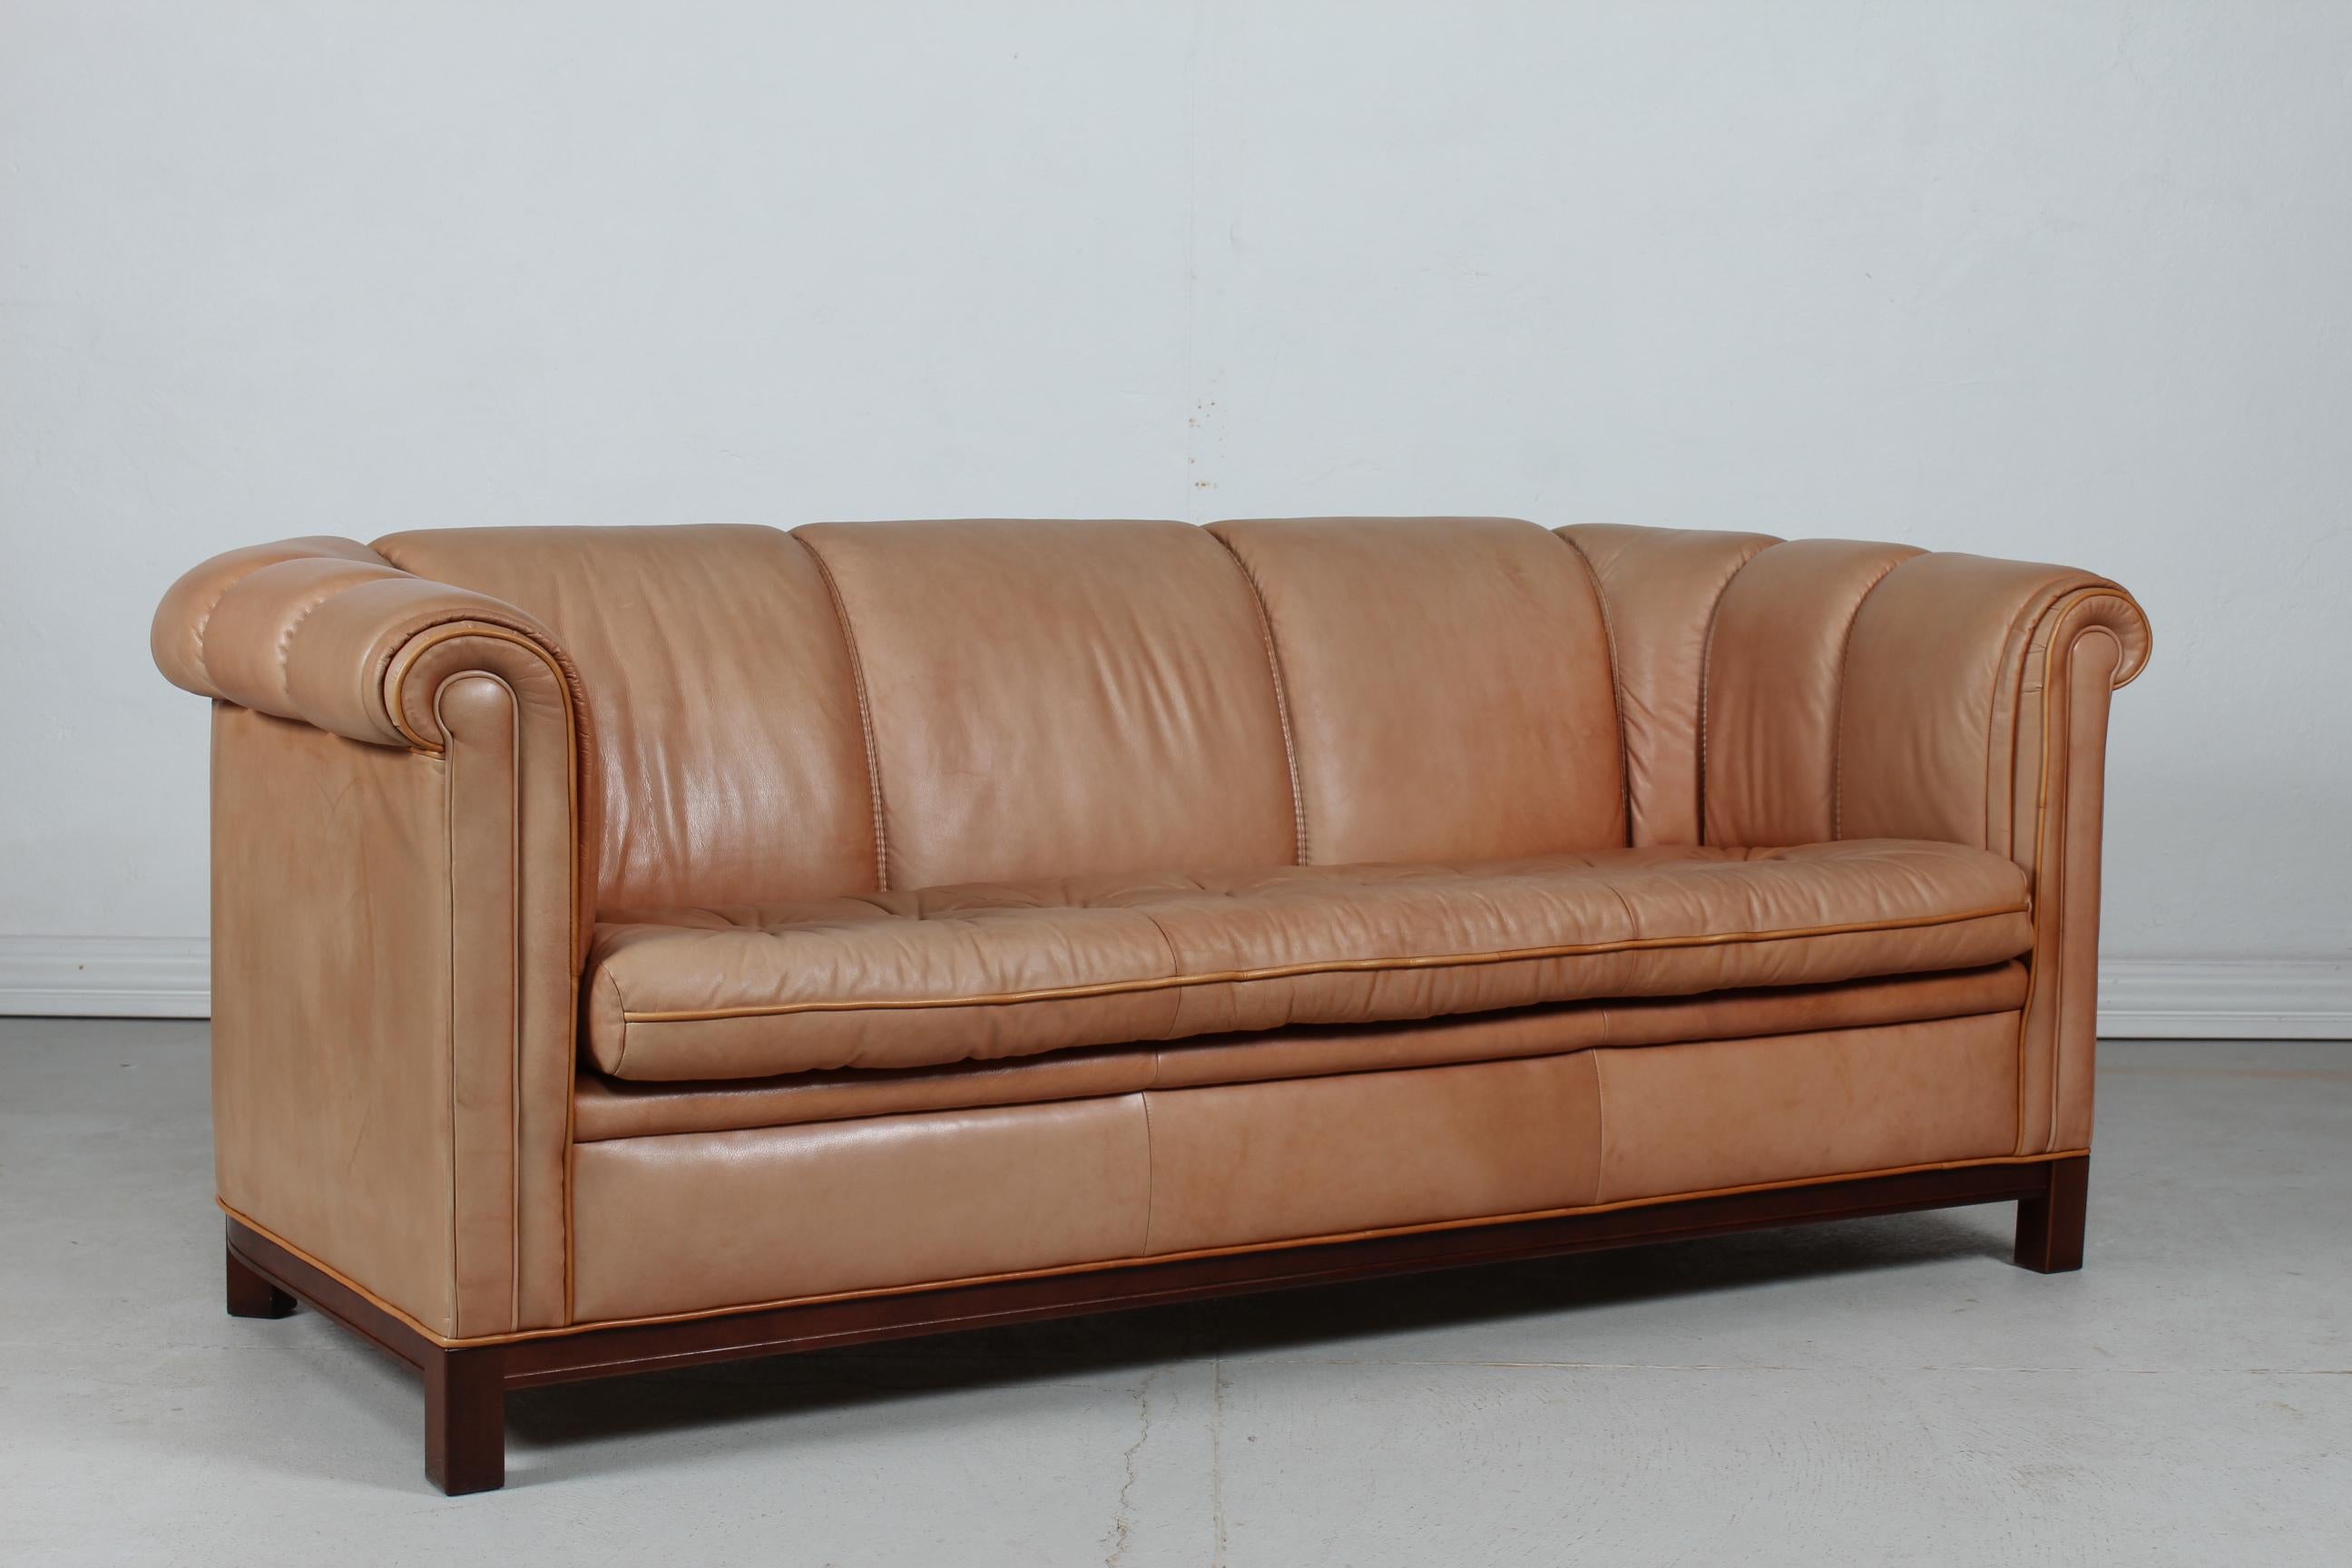 Vintage 3-seat Chesterfield sofa made in the 1970s.
It's upholstered with delicate and good quality cognac colored leather. The frame is made of mahogany.

The sofa is in good vintage condition with patina from sun light and gentle use.
 
   